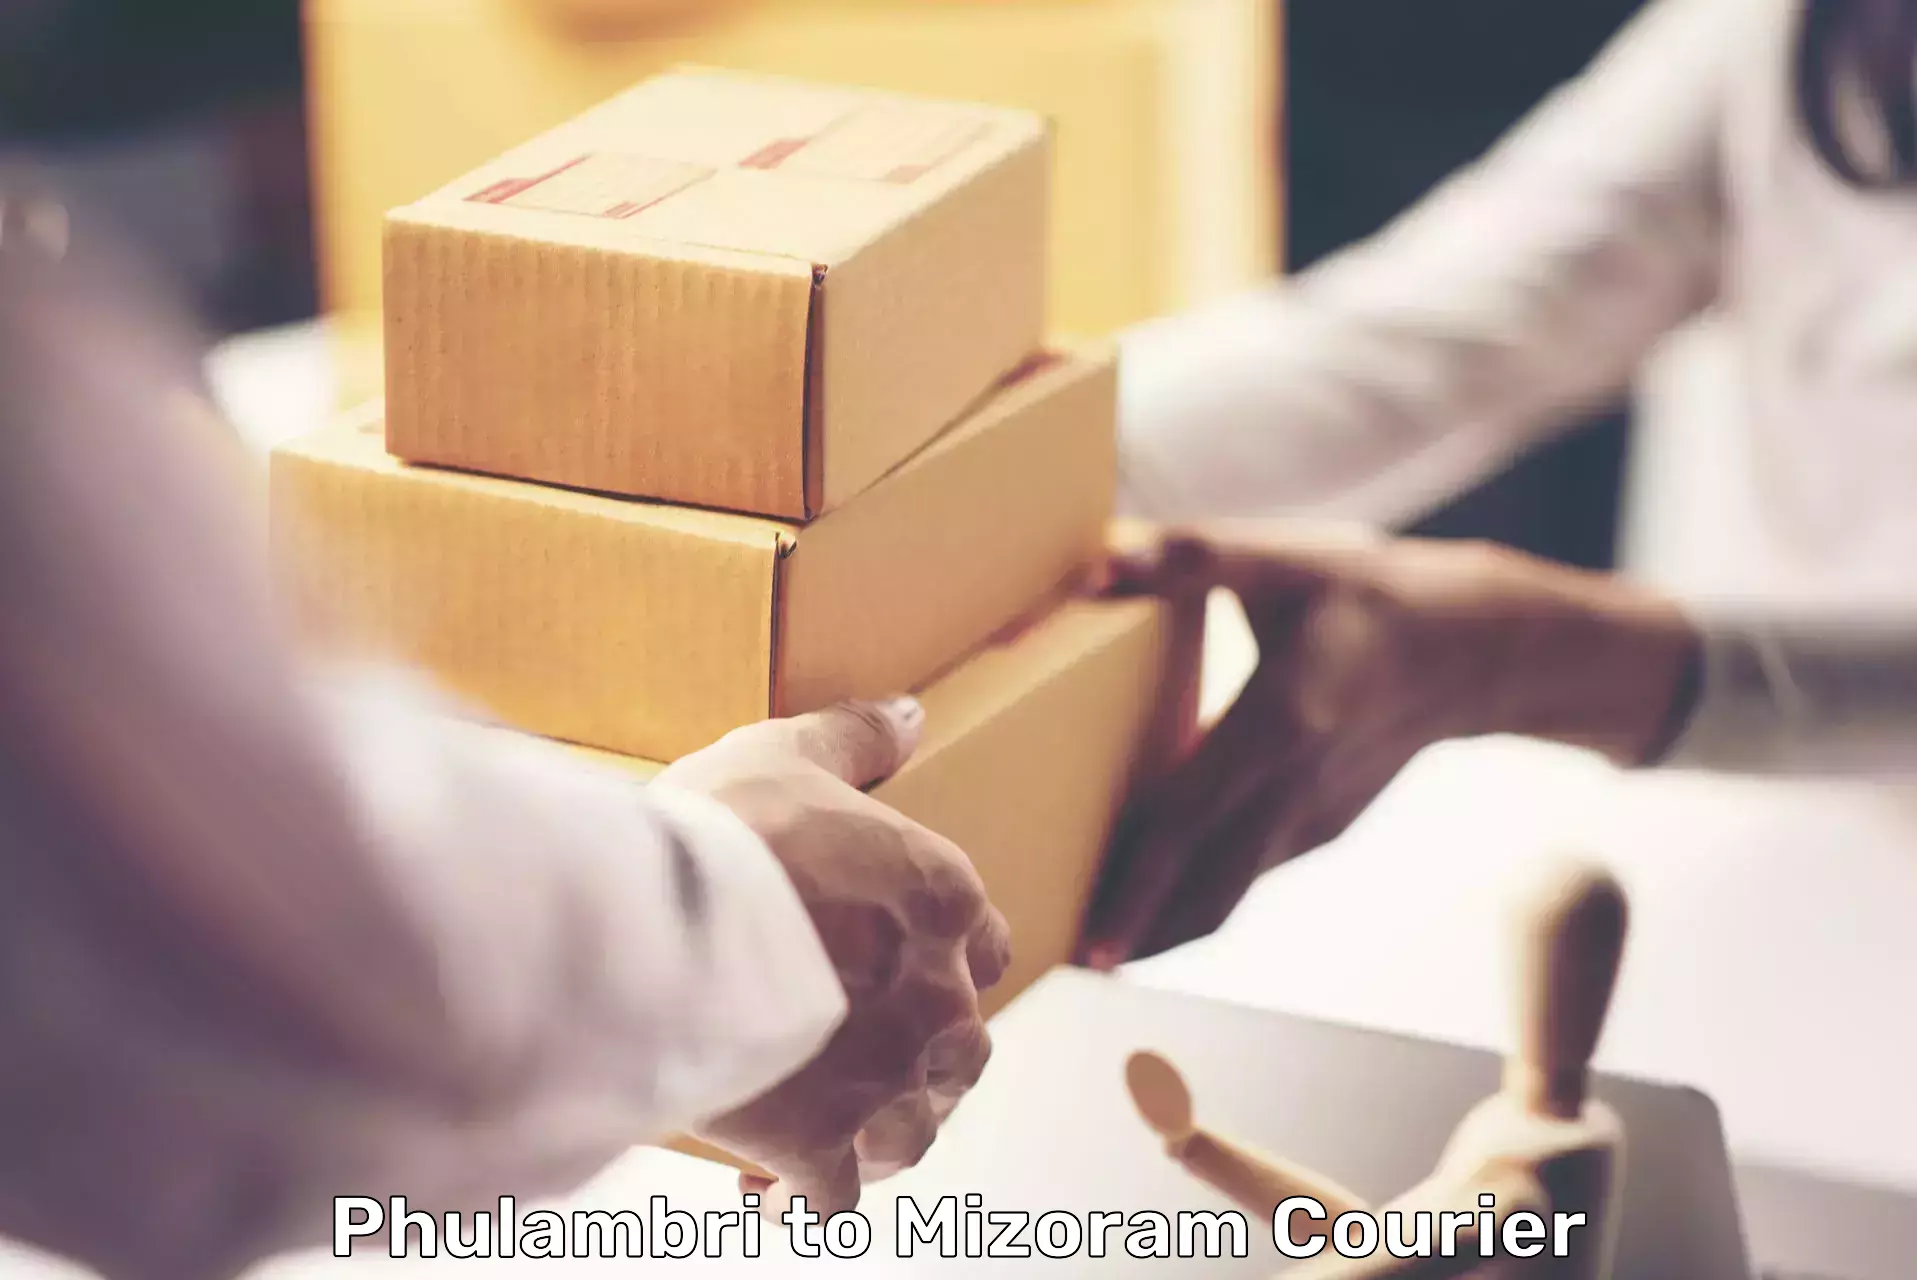 Same-day delivery solutions Phulambri to Mizoram